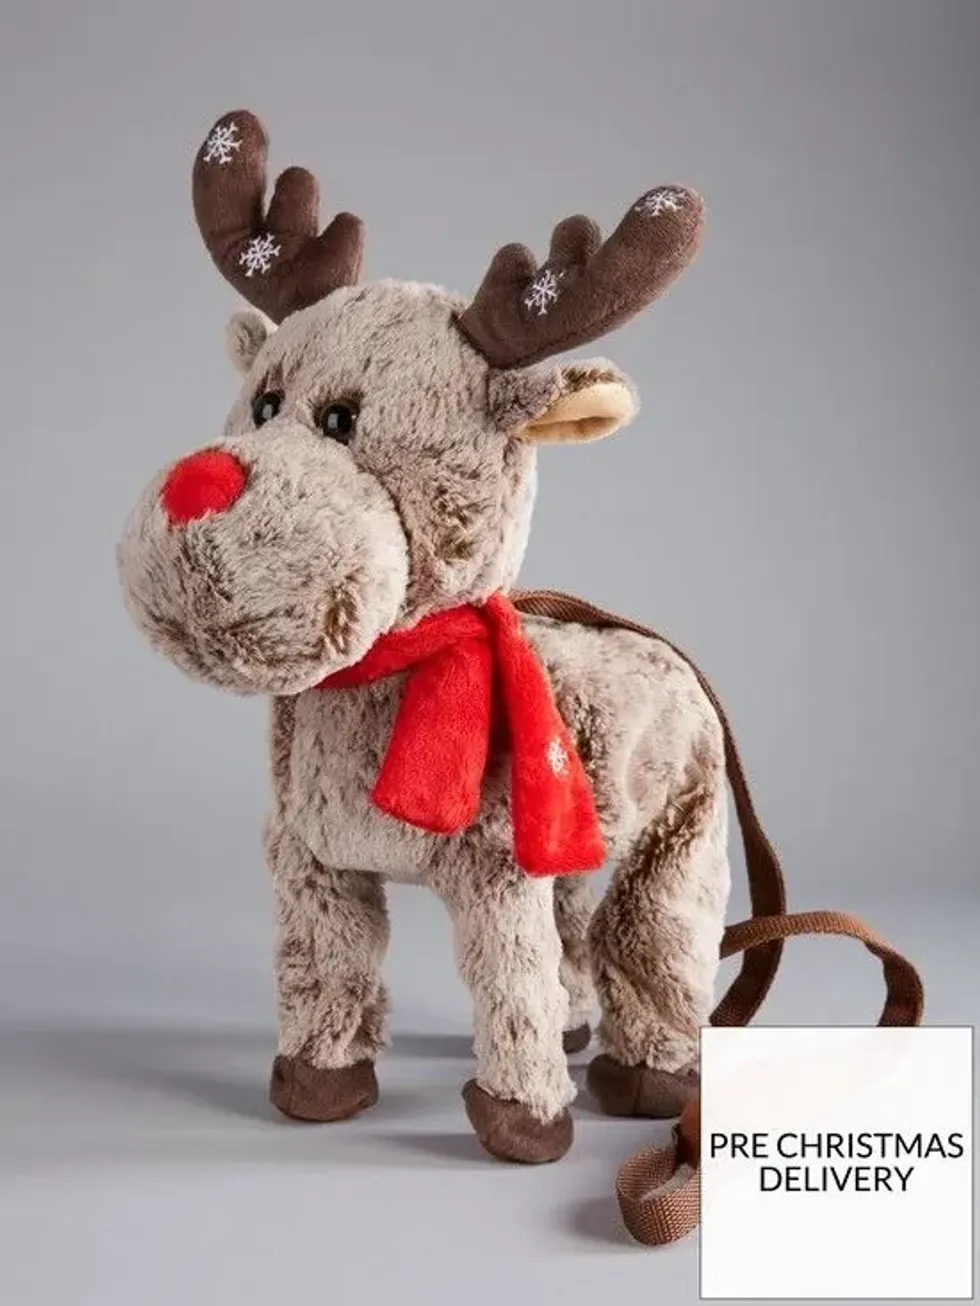 Festive Animated Walking And Singing Reindeer From Very.